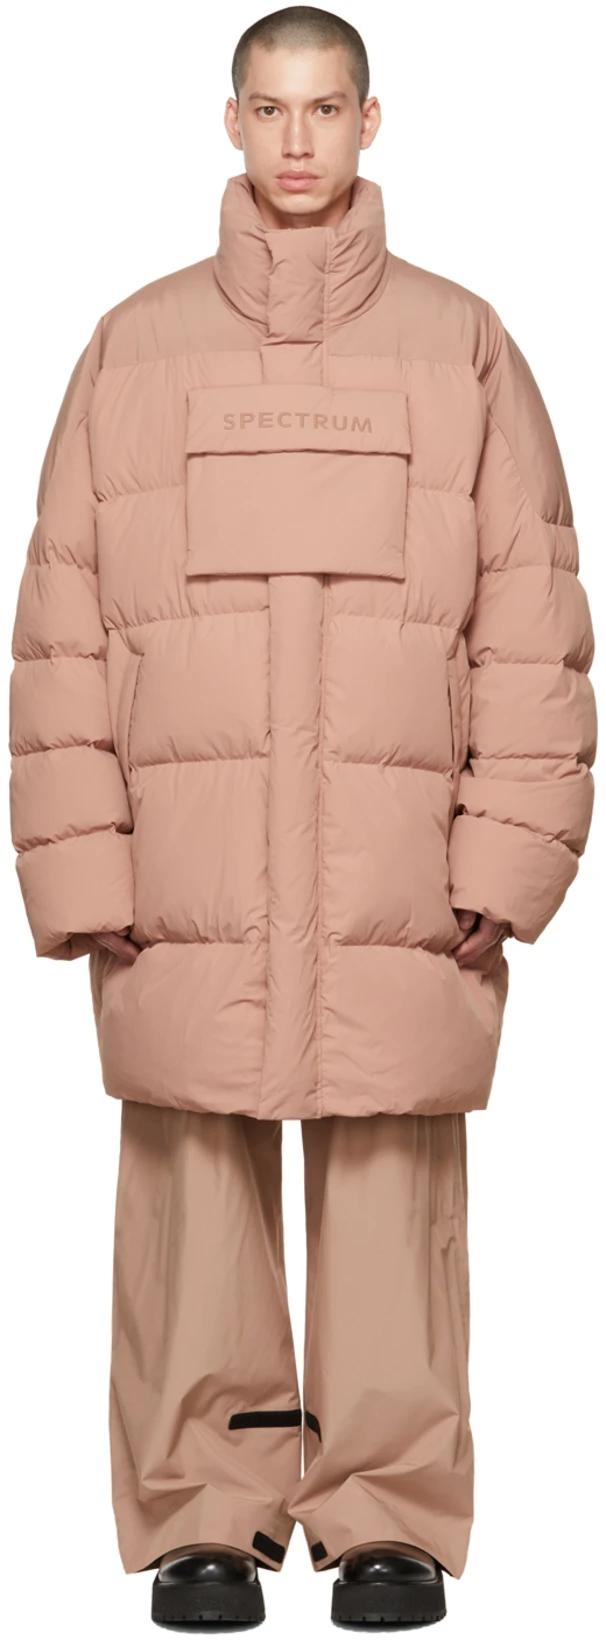 Pink Vidor Down Jacket by A. A. SPECTRUM